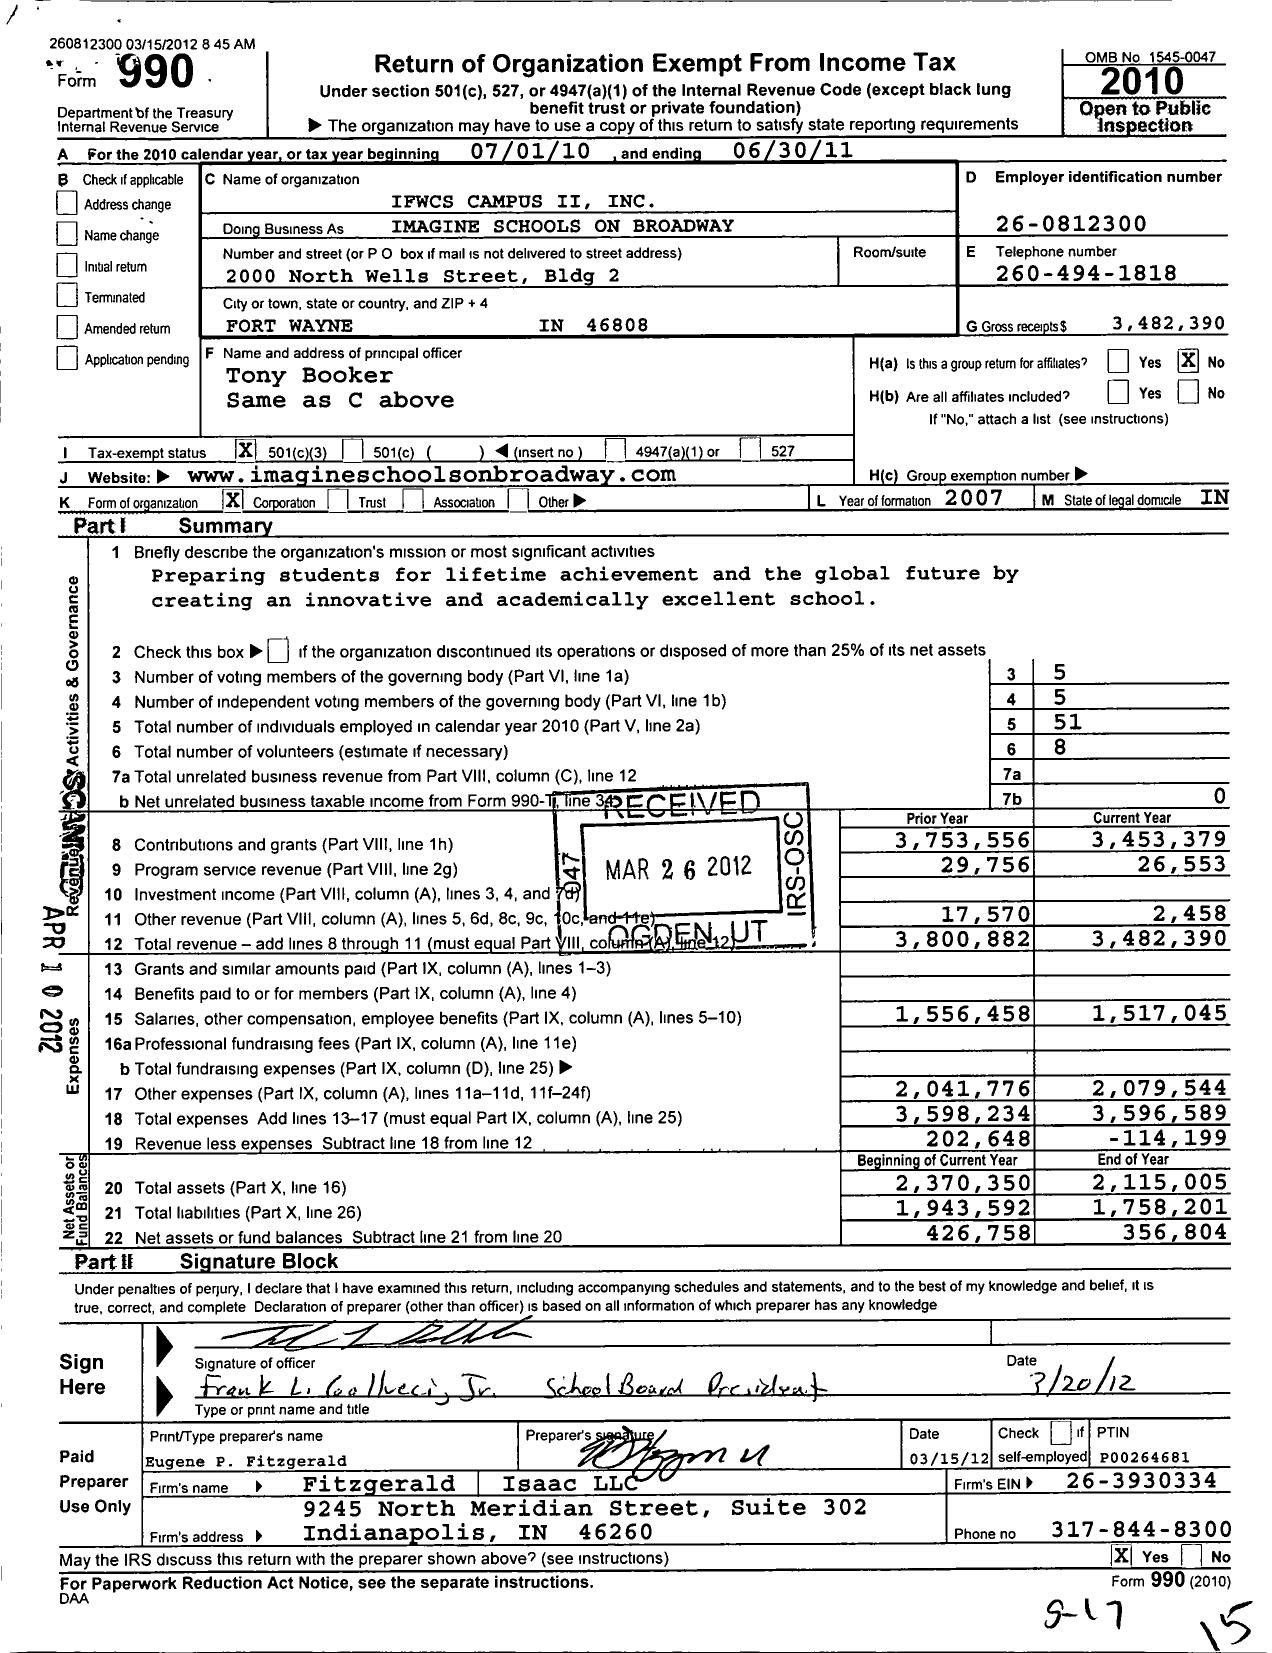 Image of first page of 2010 Form 990 for Ifwcs Campus Ii